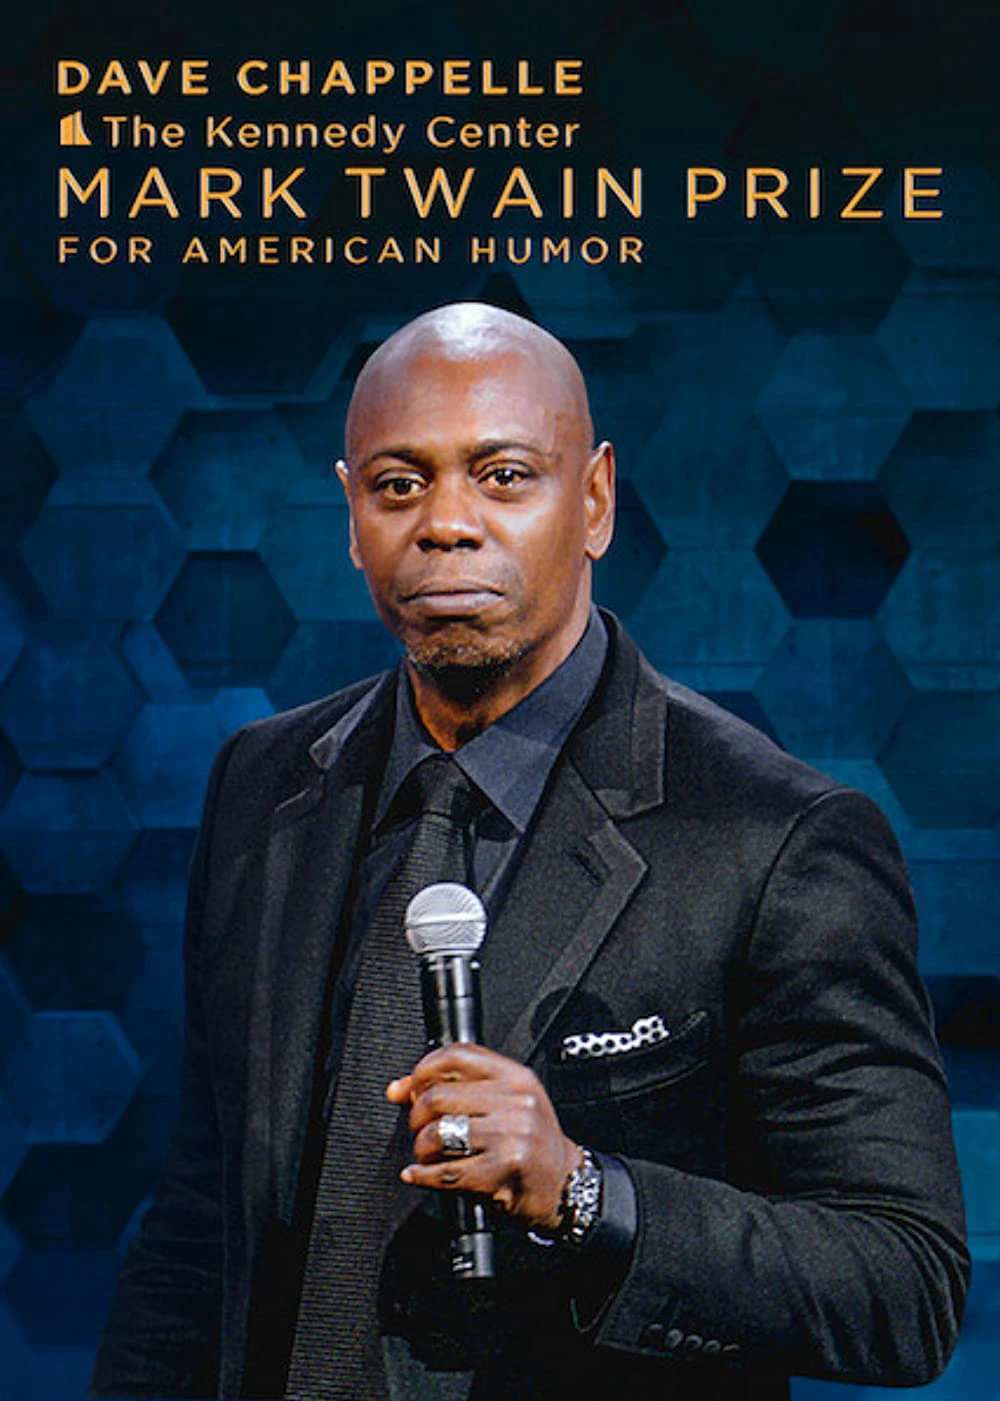 Dave Chappelle: Giải thưởng Mark Twain về hài kịch | Dave Chappelle: The Kennedy Center Mark Twain Prize for American Humor (2020)